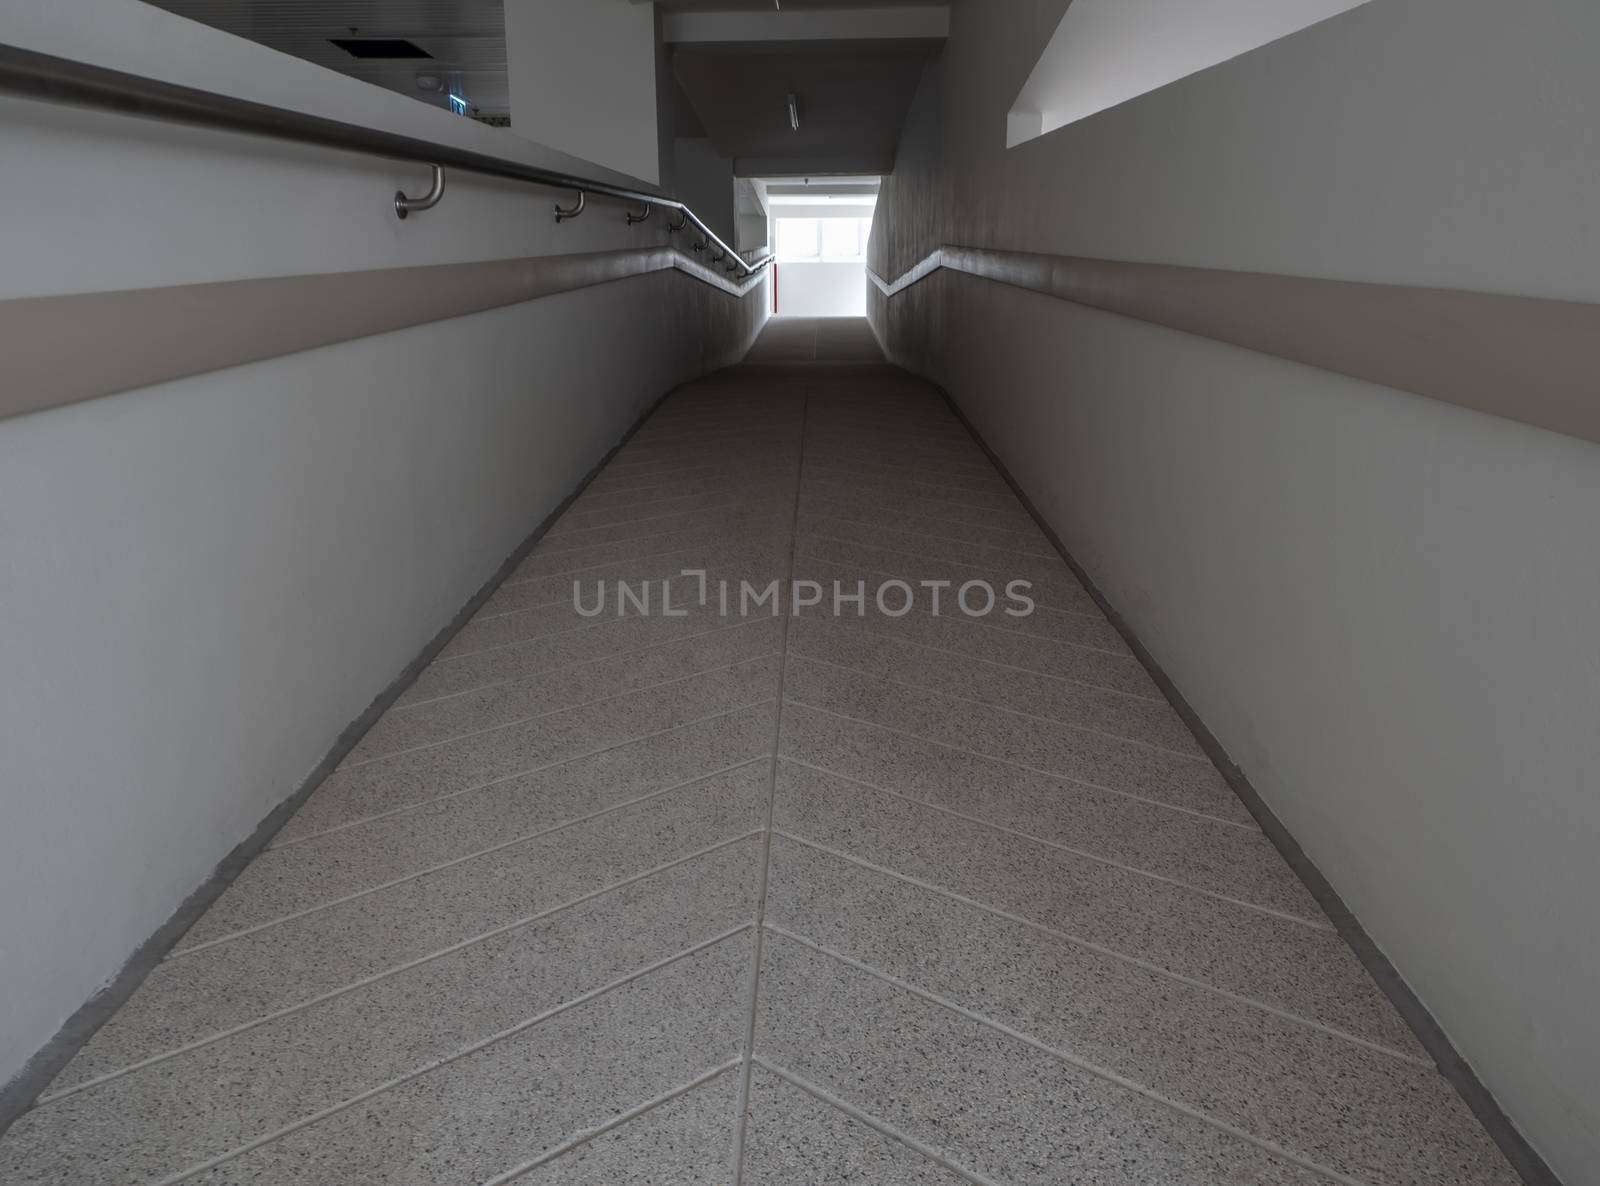 Light at the exit of the corridor in the building by Satakorn